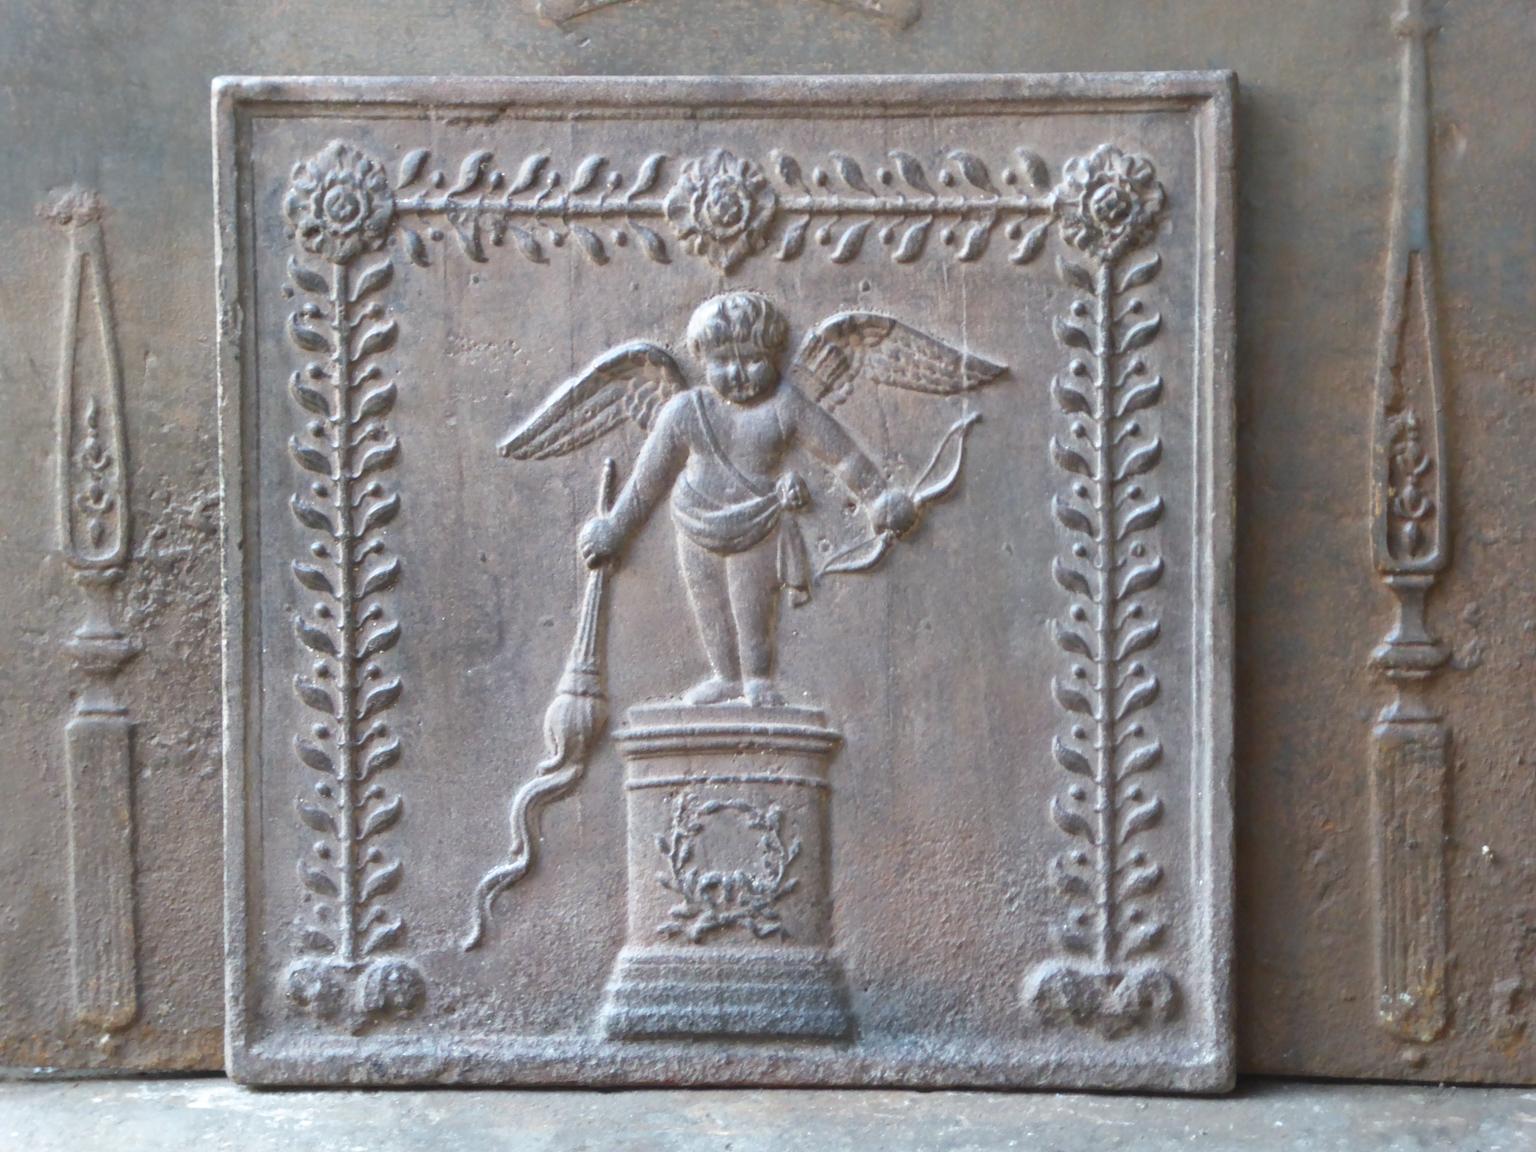 Late 18th of early 19th century French Neoclassical fireback with a cupid on a pedestal. The fireback is made of cast iron and has a natural brown patina. Upon request it can be made black or pewter. The condition is good, no cracks.















 